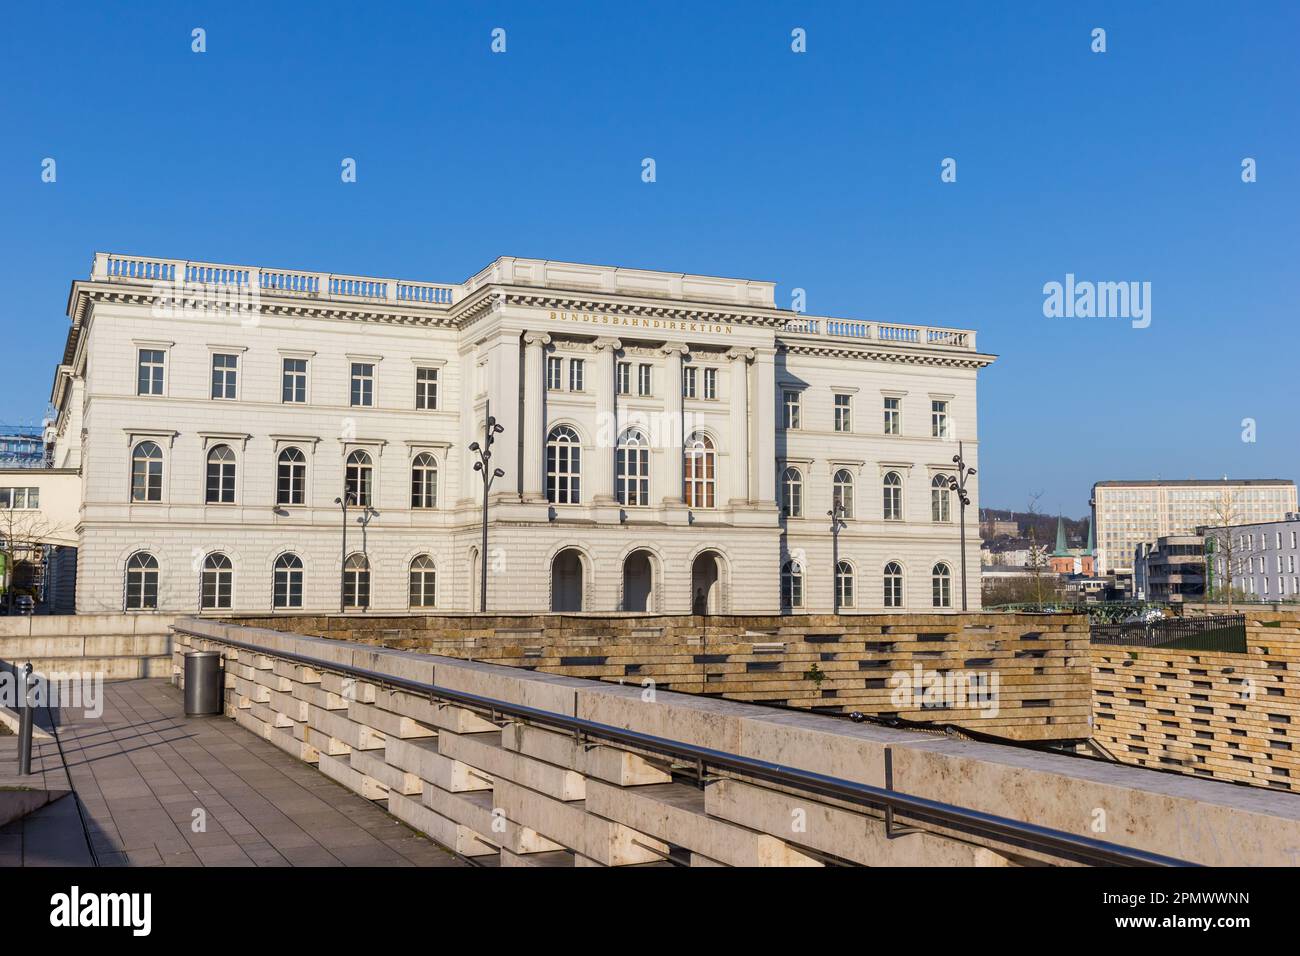 Wall in front of the bundesbahndirektion government building in Wuppertal, Germany Stock Photo